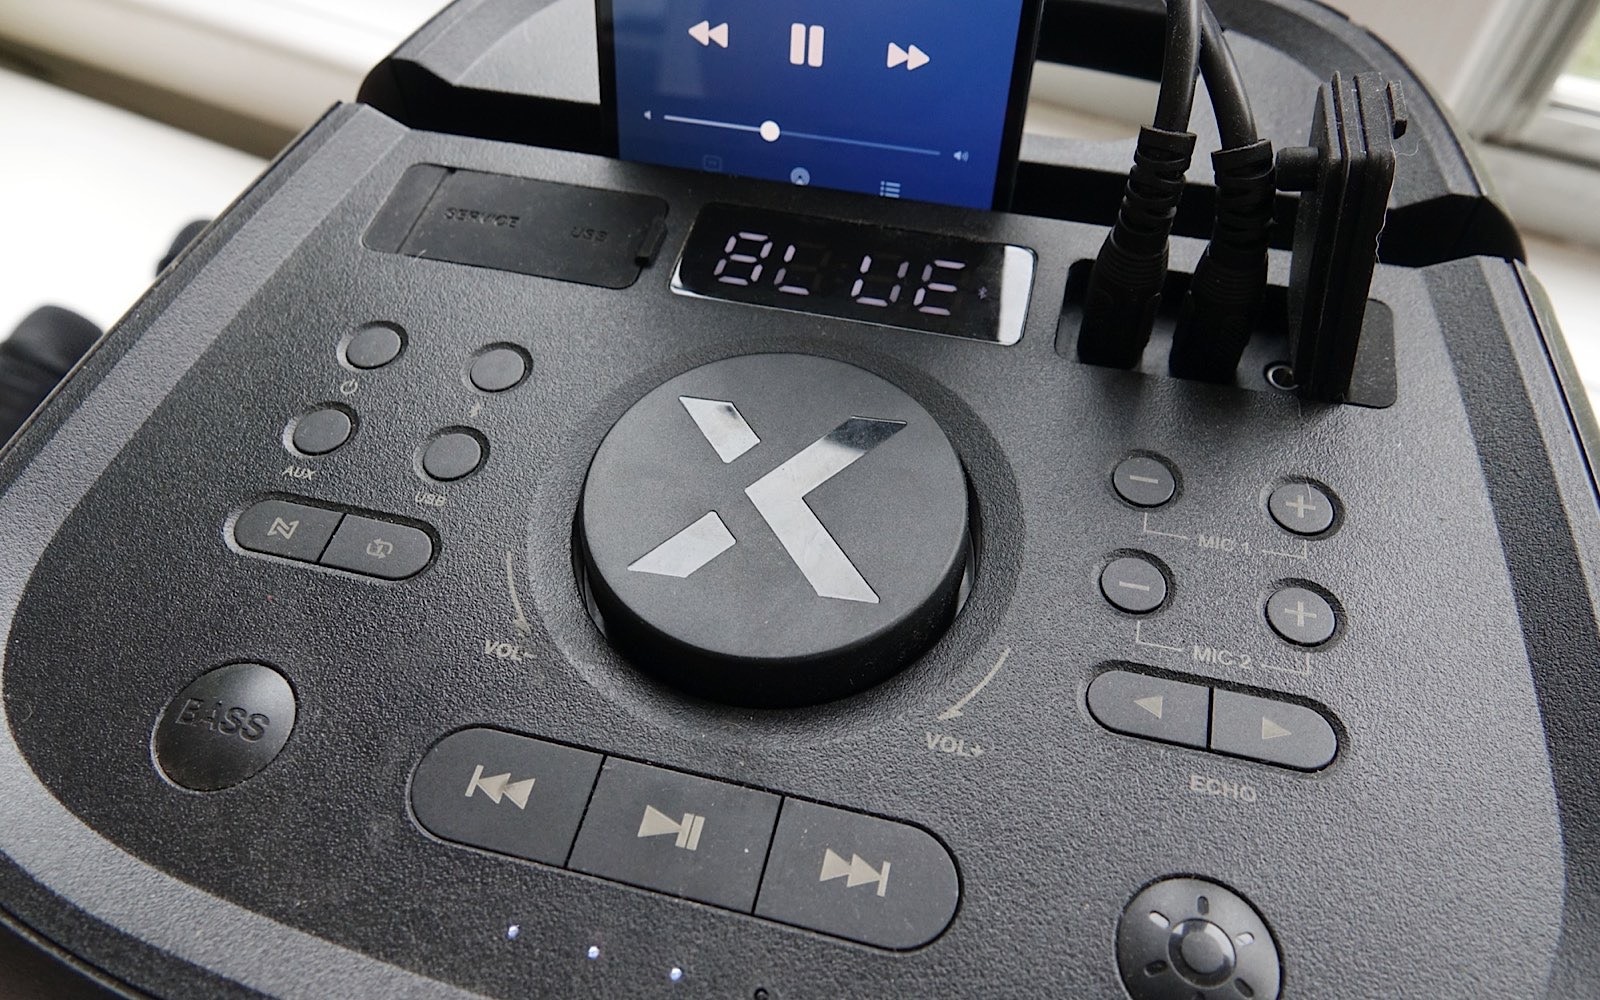 The controls of the BlueAnt X5.